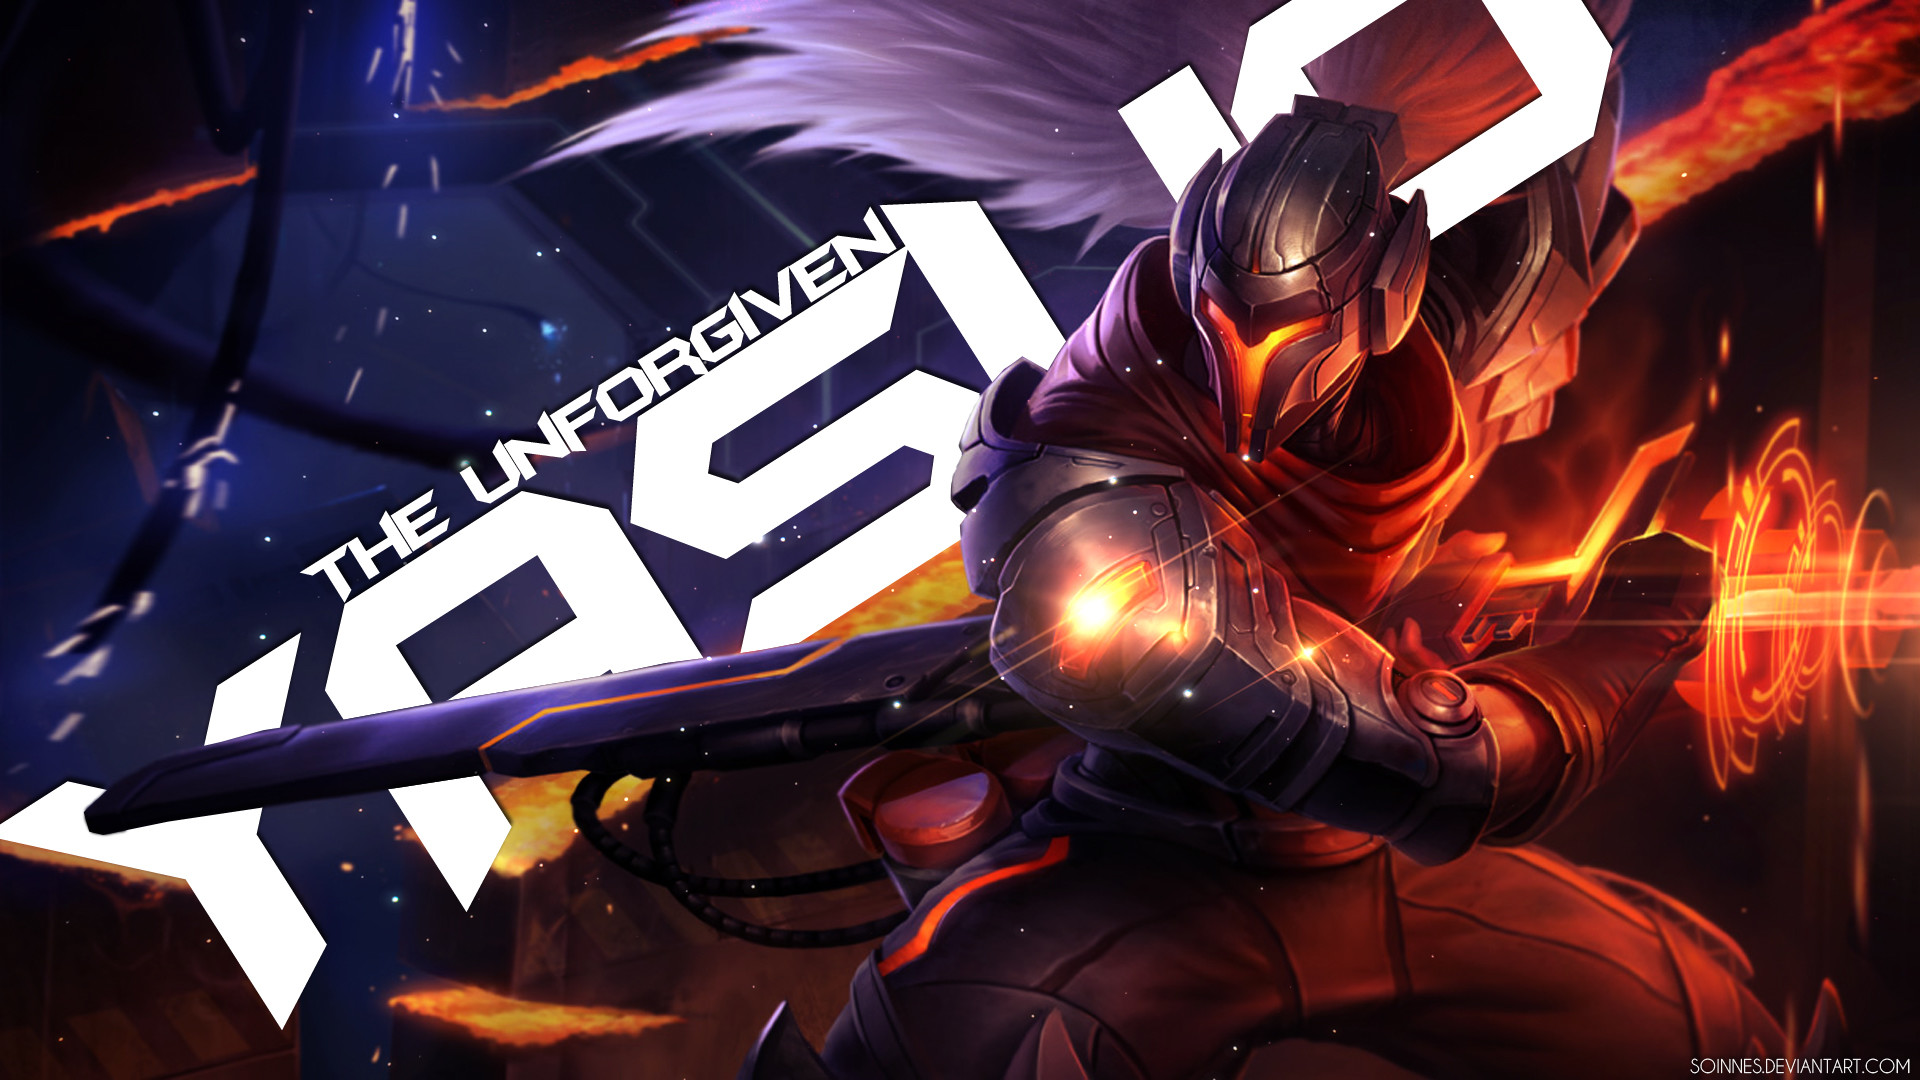 1920x1080 Yasuo the Unforgiven - League of Legends Wallpaper by Soinnes on .